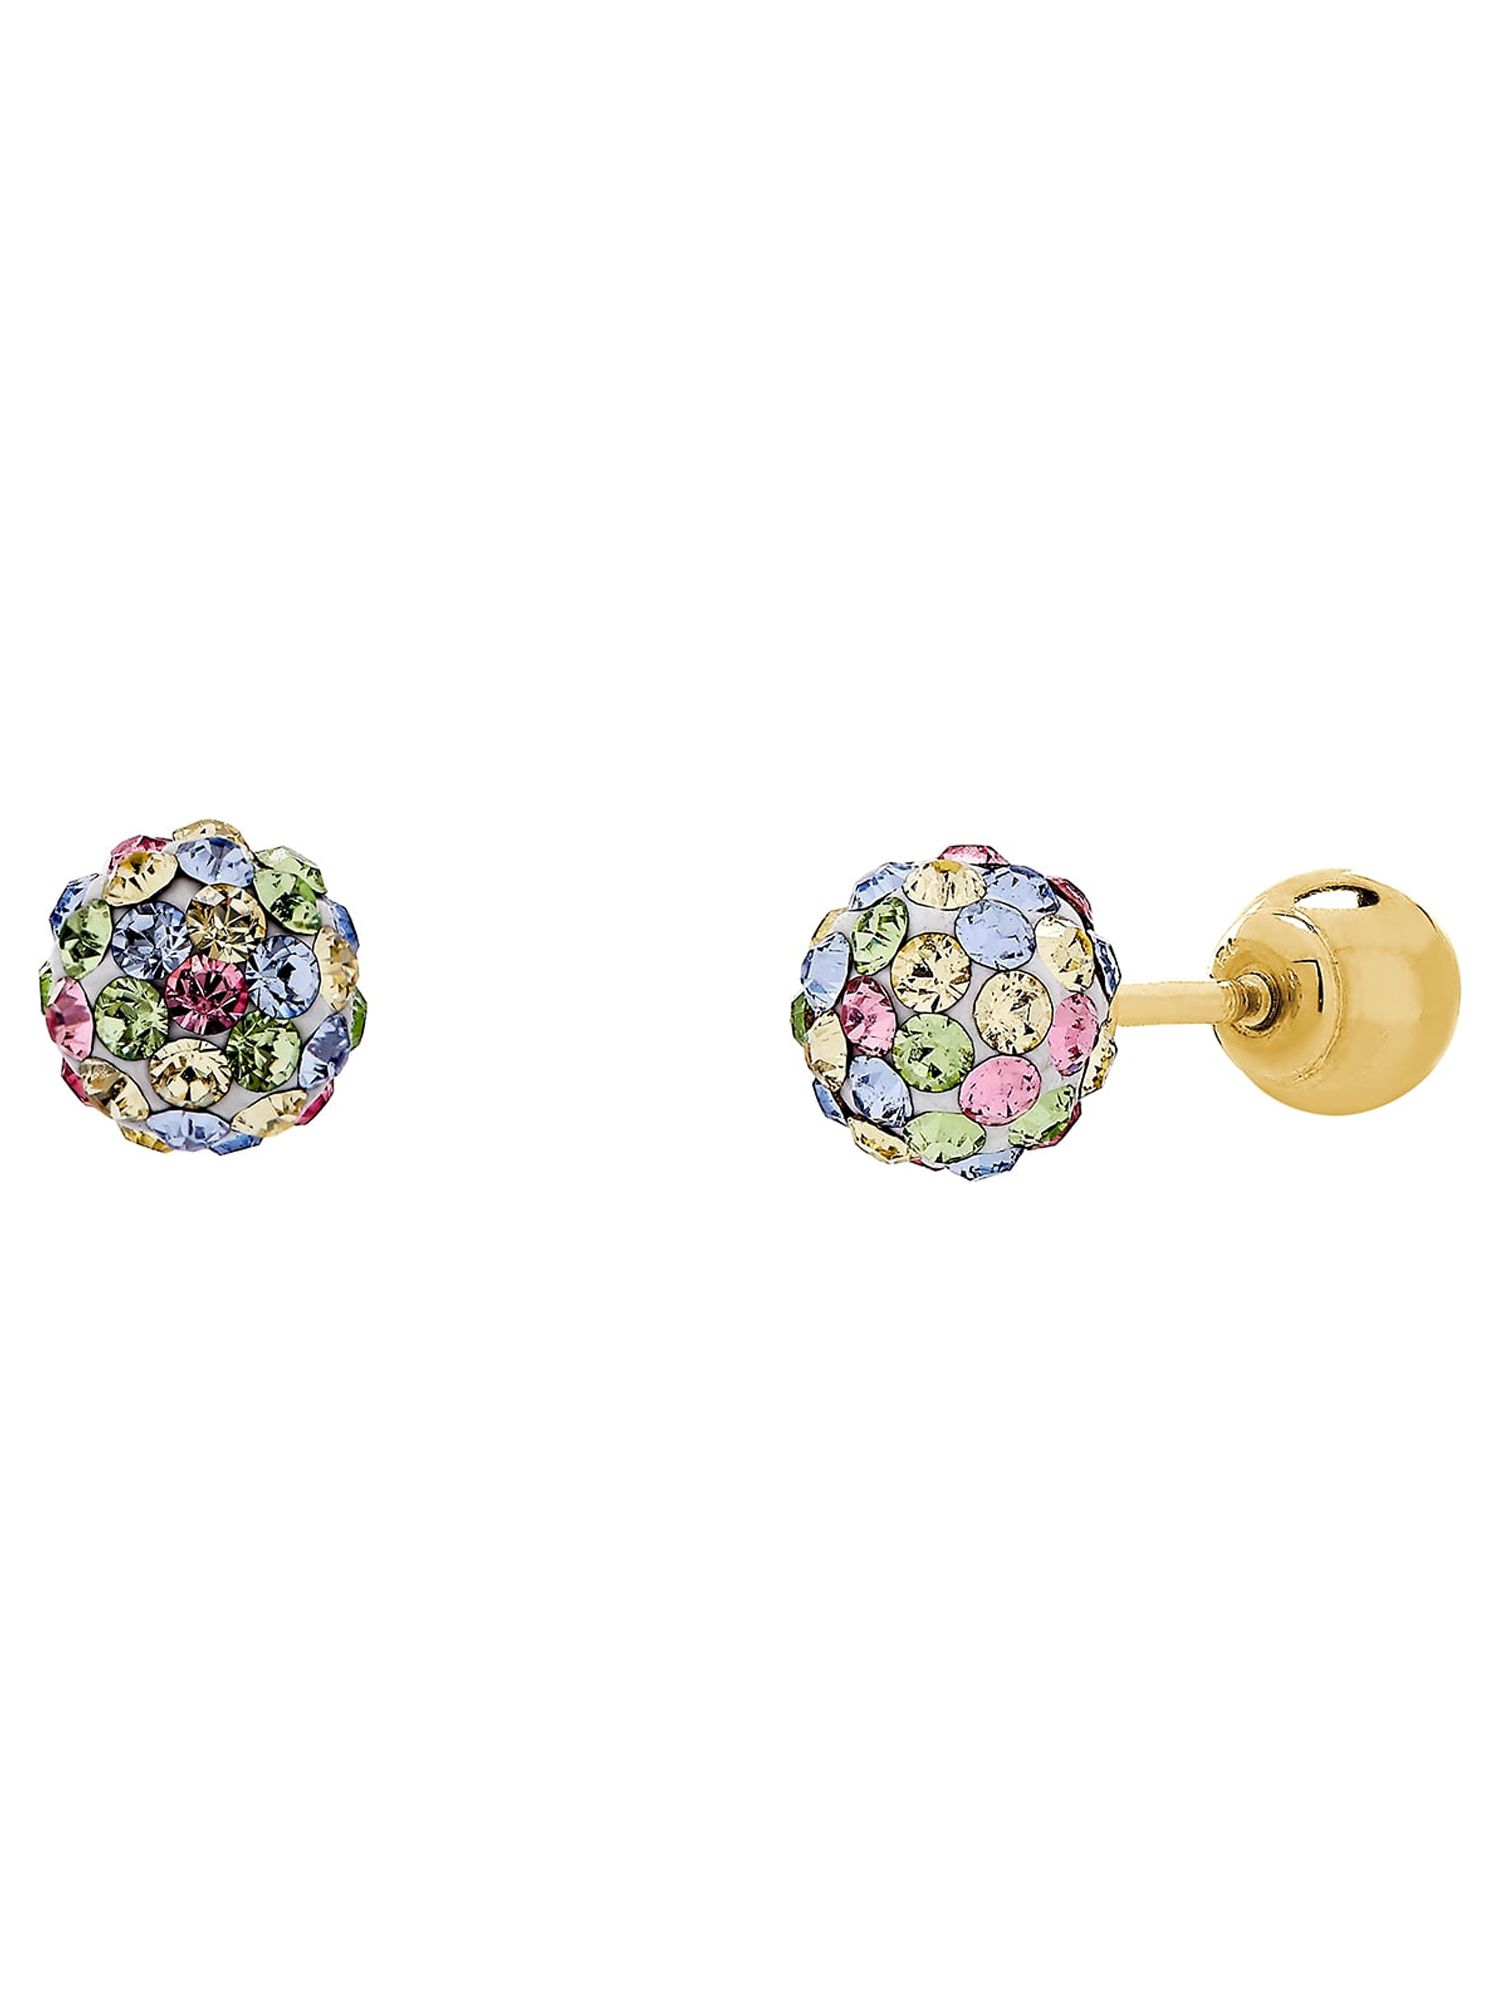 Brilliance Fine Jewelry Girls' Pastel Crystals 4.8MM Ball Earrings in 10K Yellow Gold - image 4 of 4